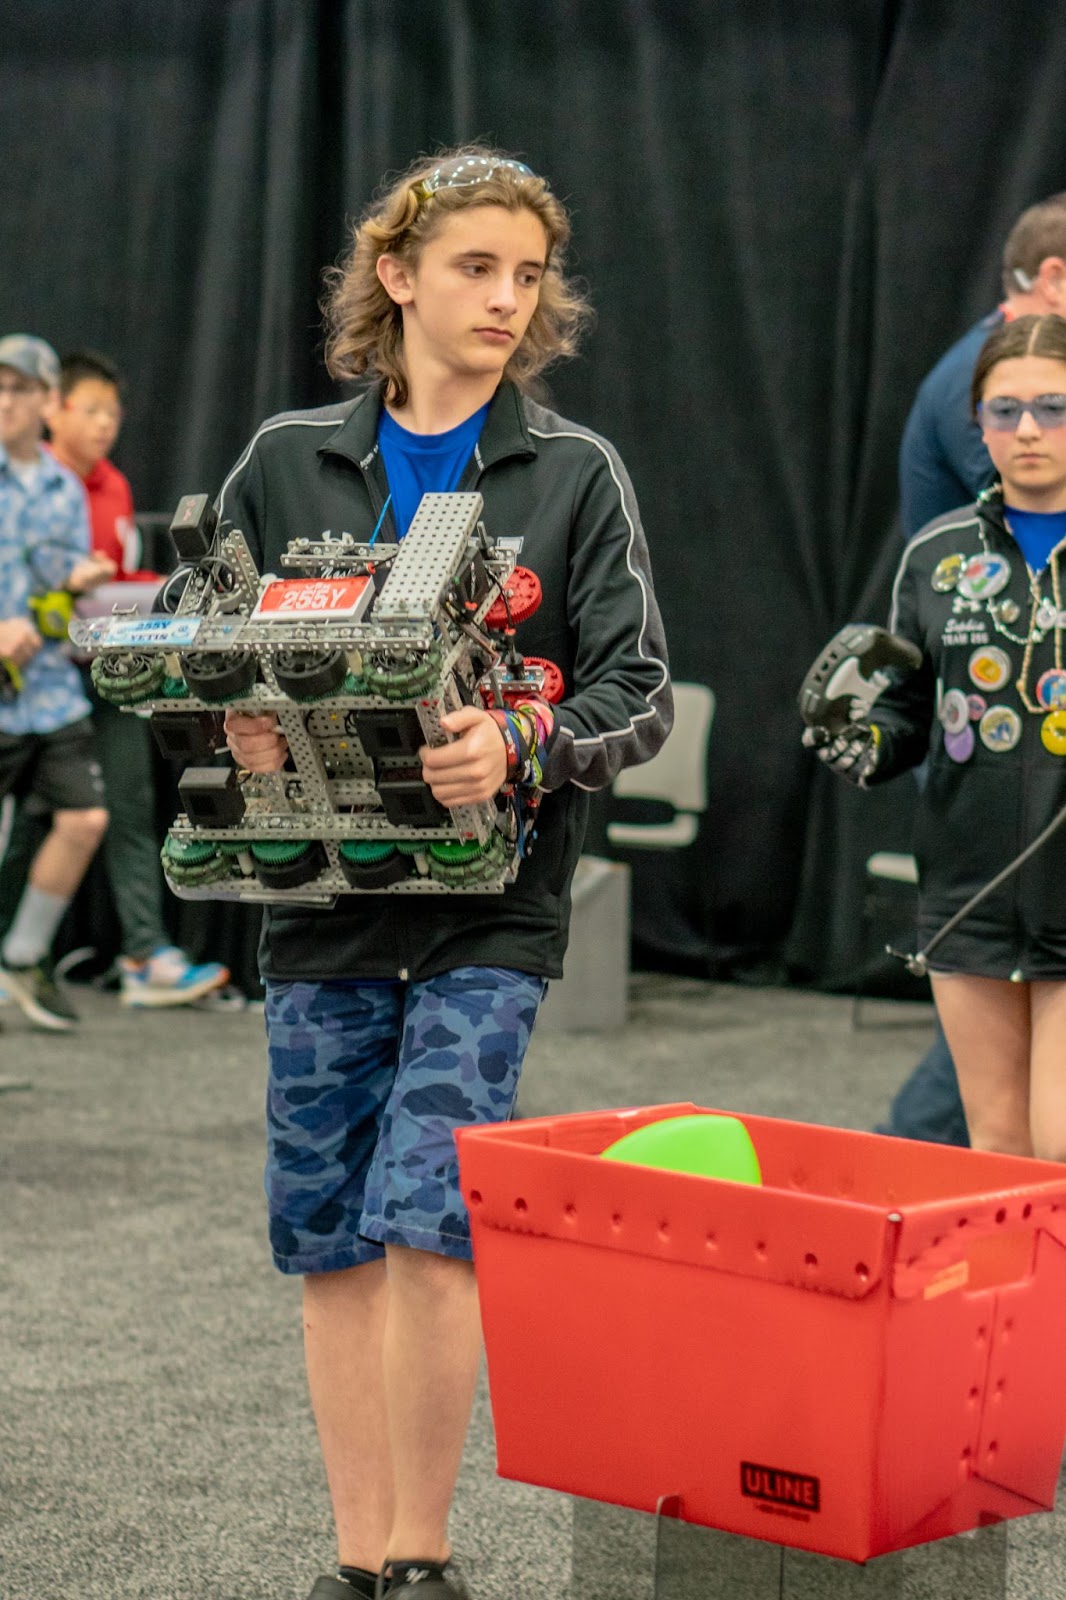 Student carrying robot to playing field